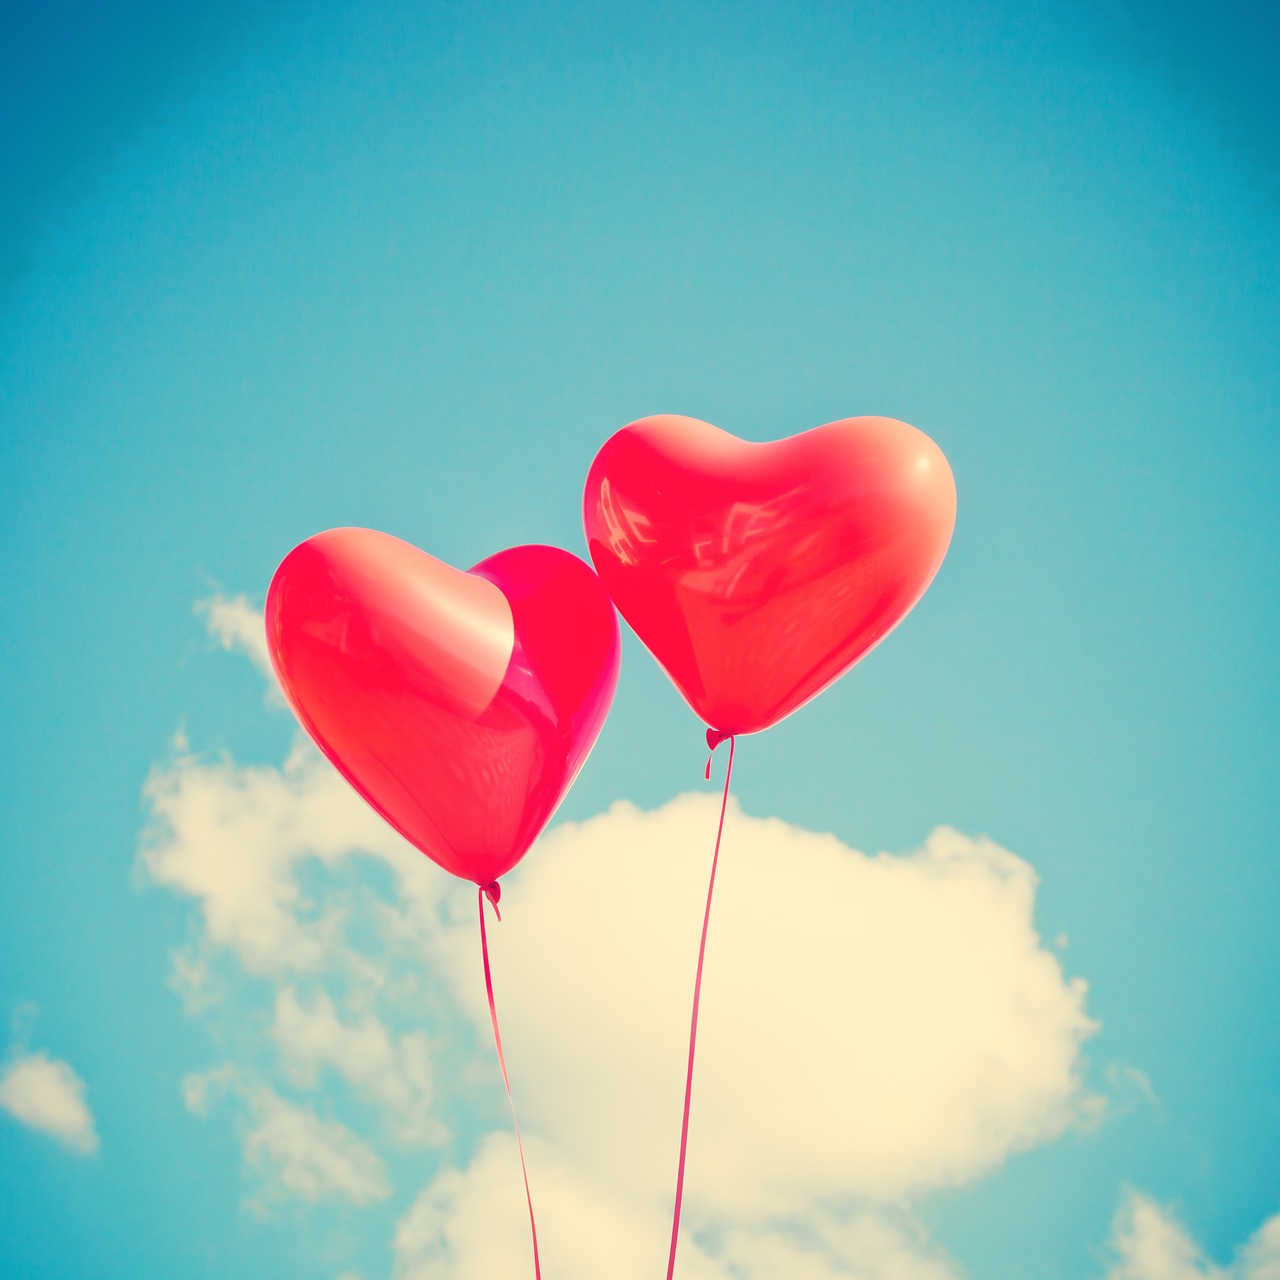 Two heart-shaped balloons.